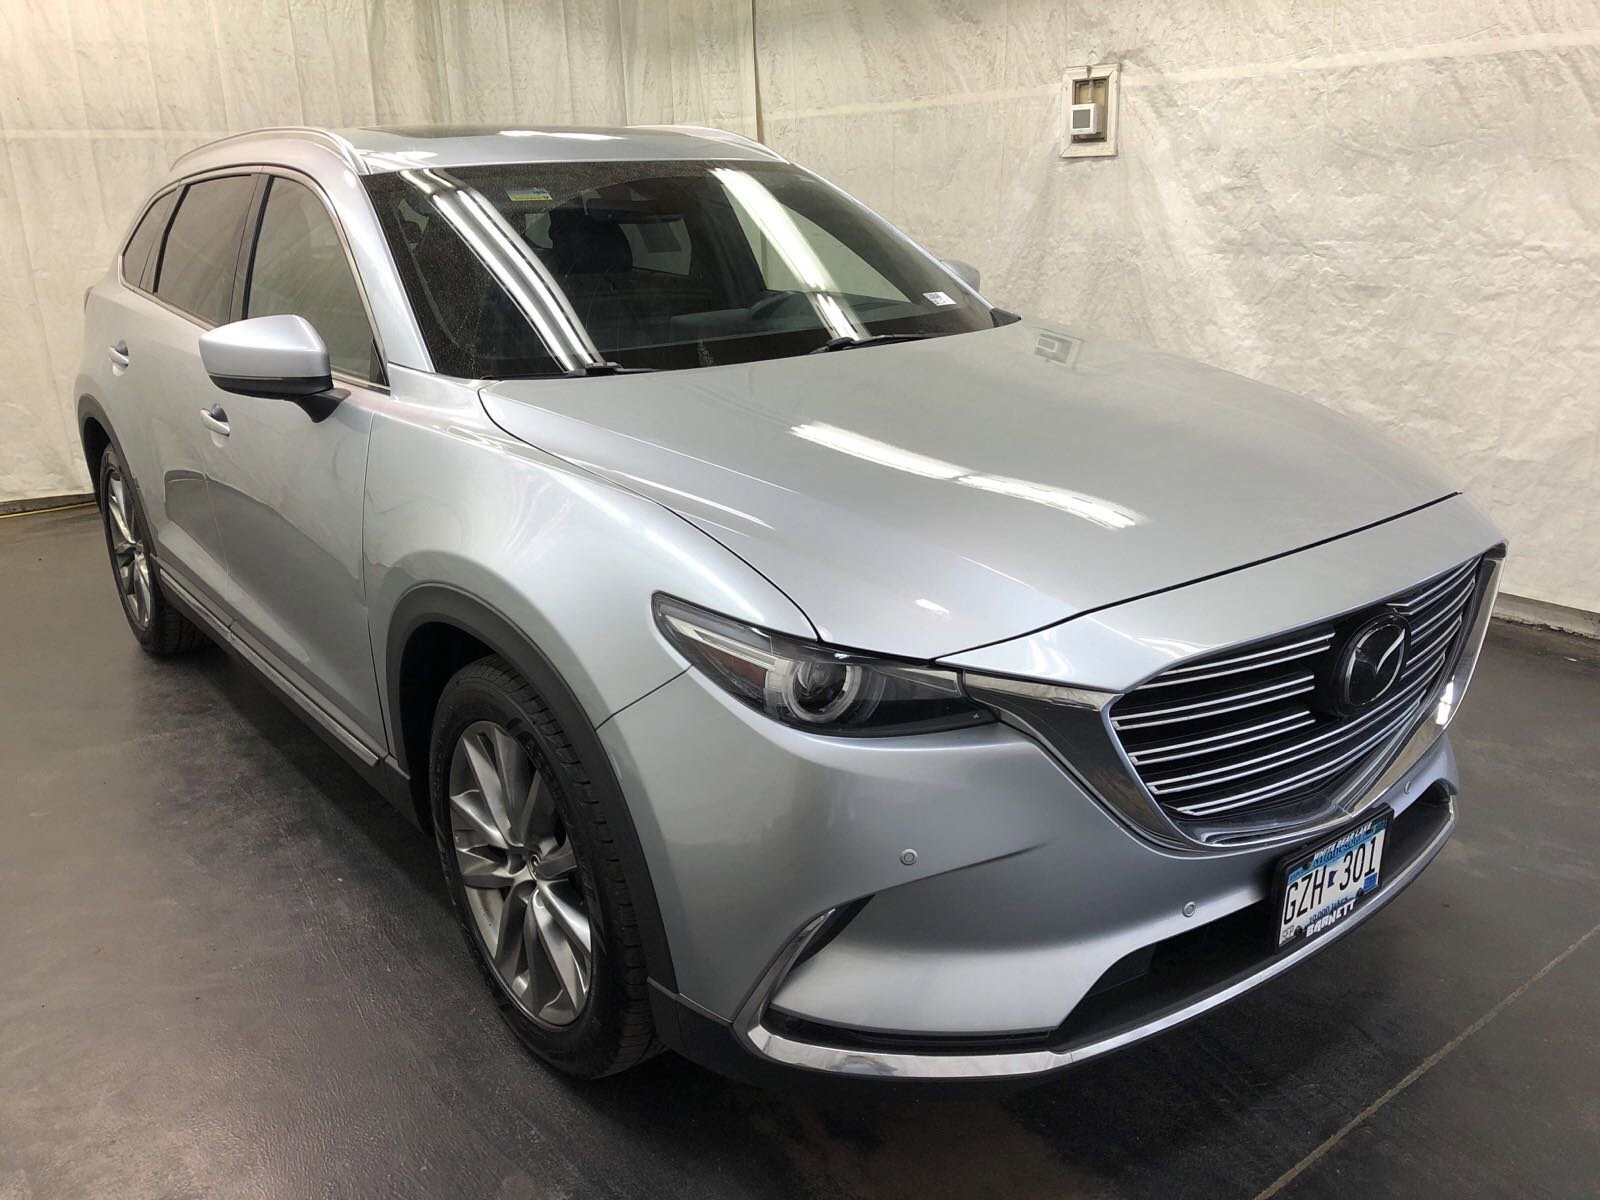 Used 2019 Mazda CX-9 Grand Touring with VIN JM3TCBDY6K0315153 for sale in White Bear Lake, Minnesota